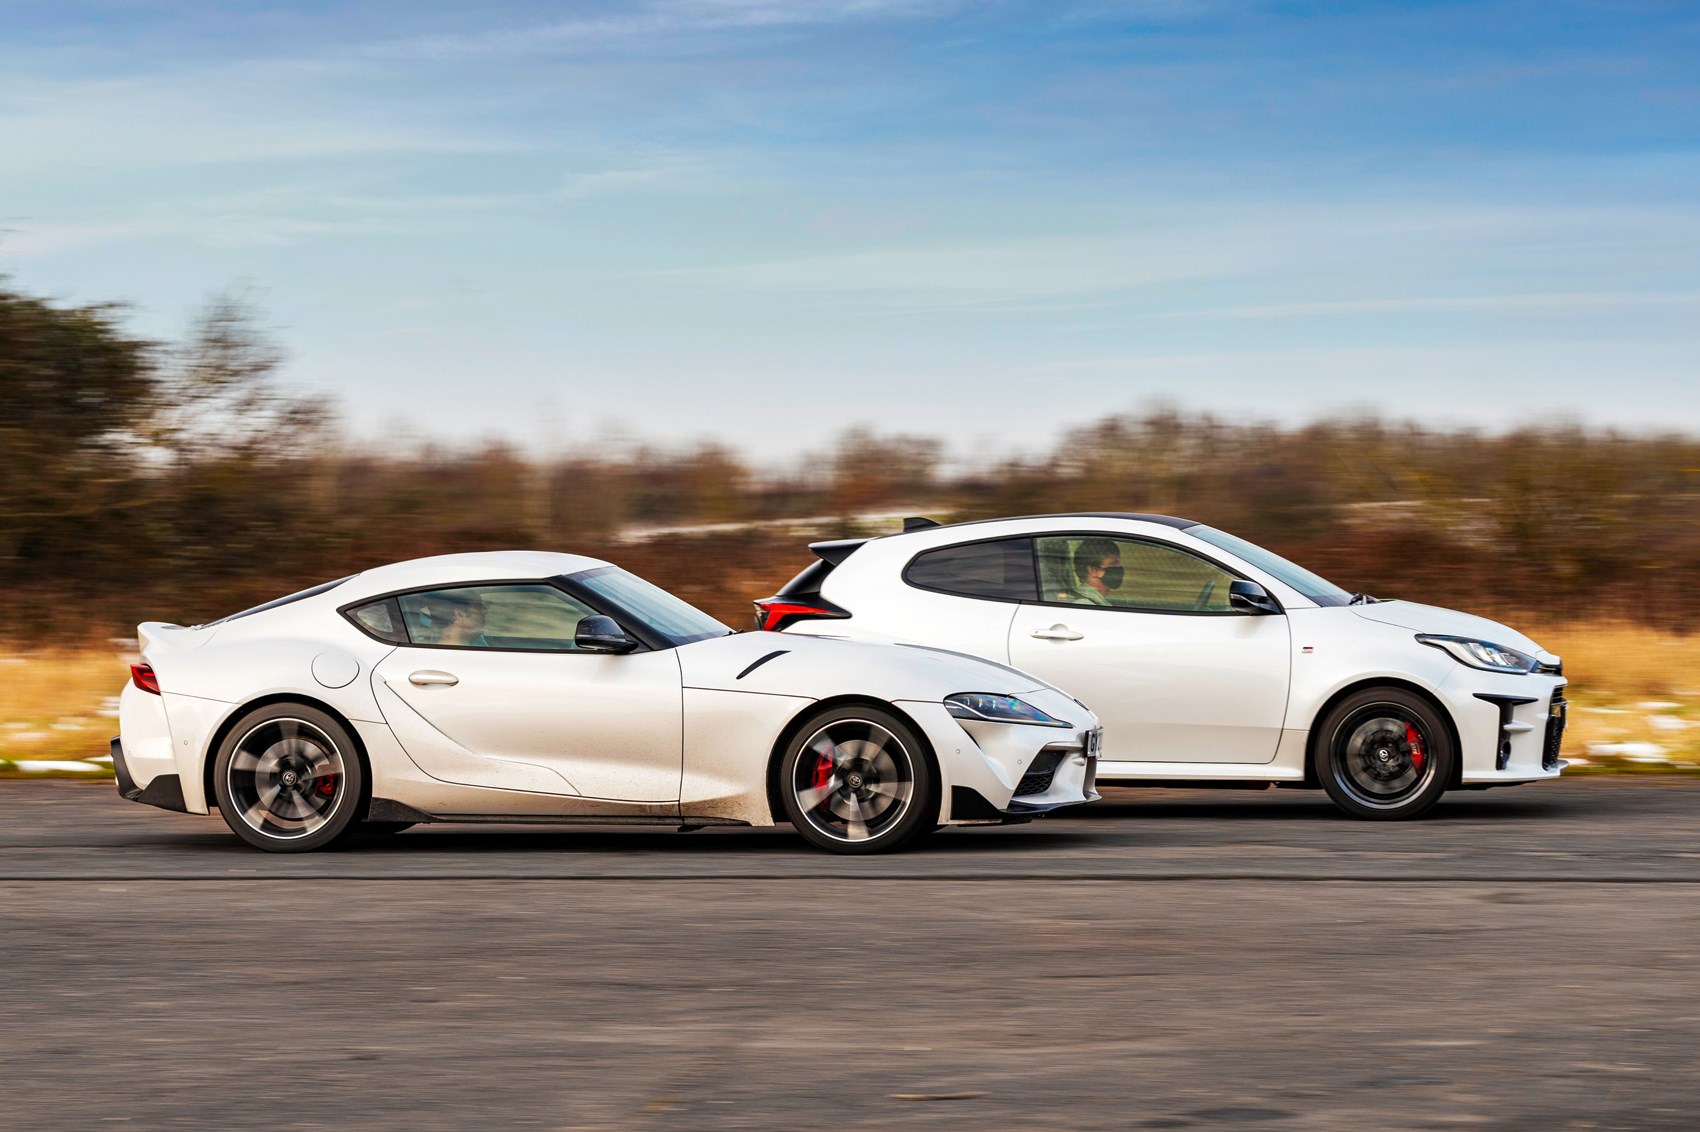 Nissan Skyline GT-R R34 Vs. Toyota Supra MK4: The Main Differences Between  The Two Sports Cars